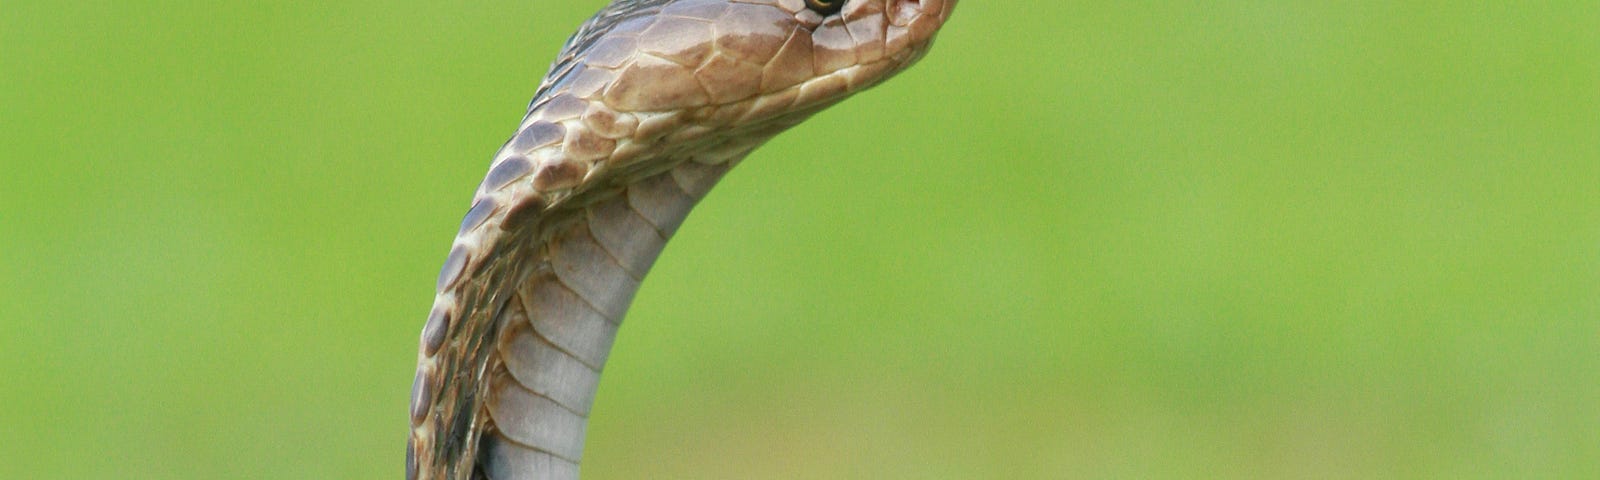 A King Cobra snake against a green blurred background. Seen in a typical stance with its head raised, smelling the air for scents.